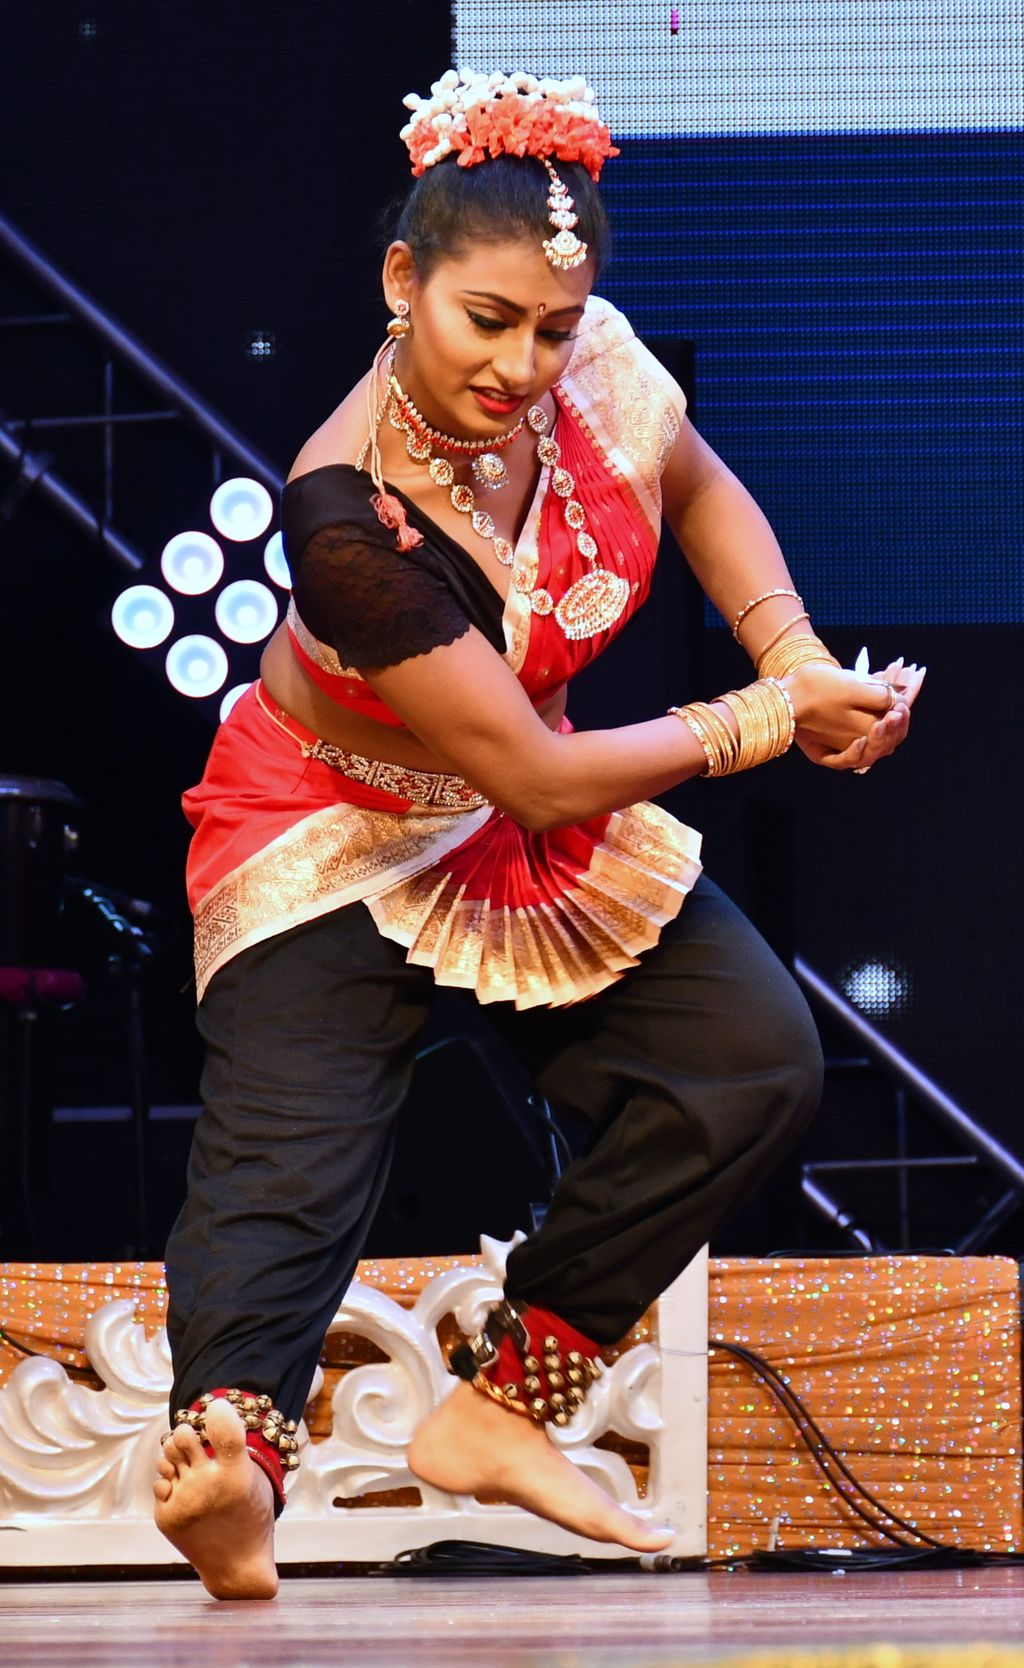 2018 Queen and winner of the talent competition Preejanjali Ria perform a dance during the talent section of the pageant.